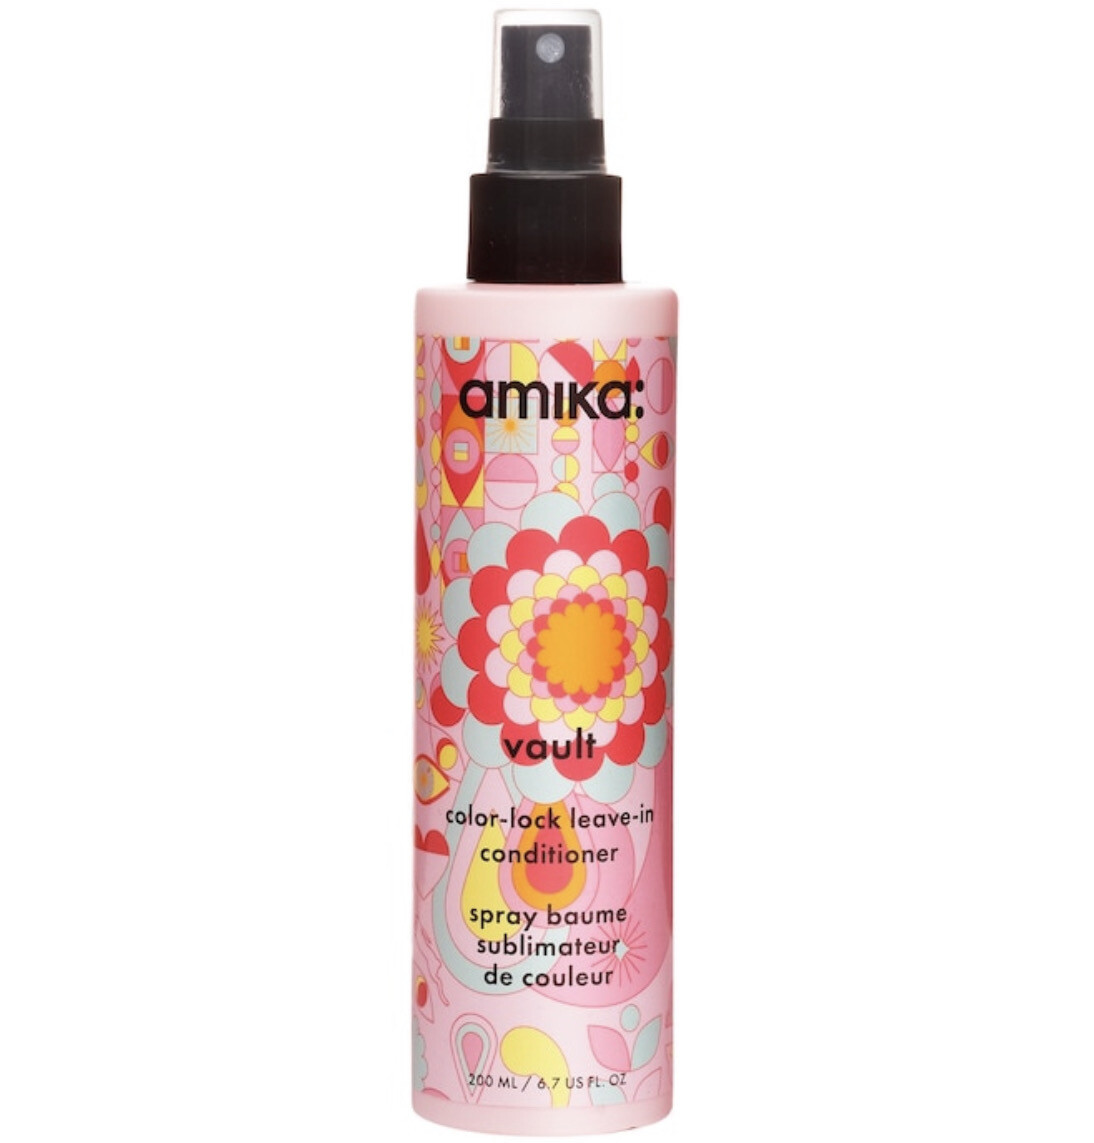 amika - Vault Leave-In Conditioner for Color-Treated Hair